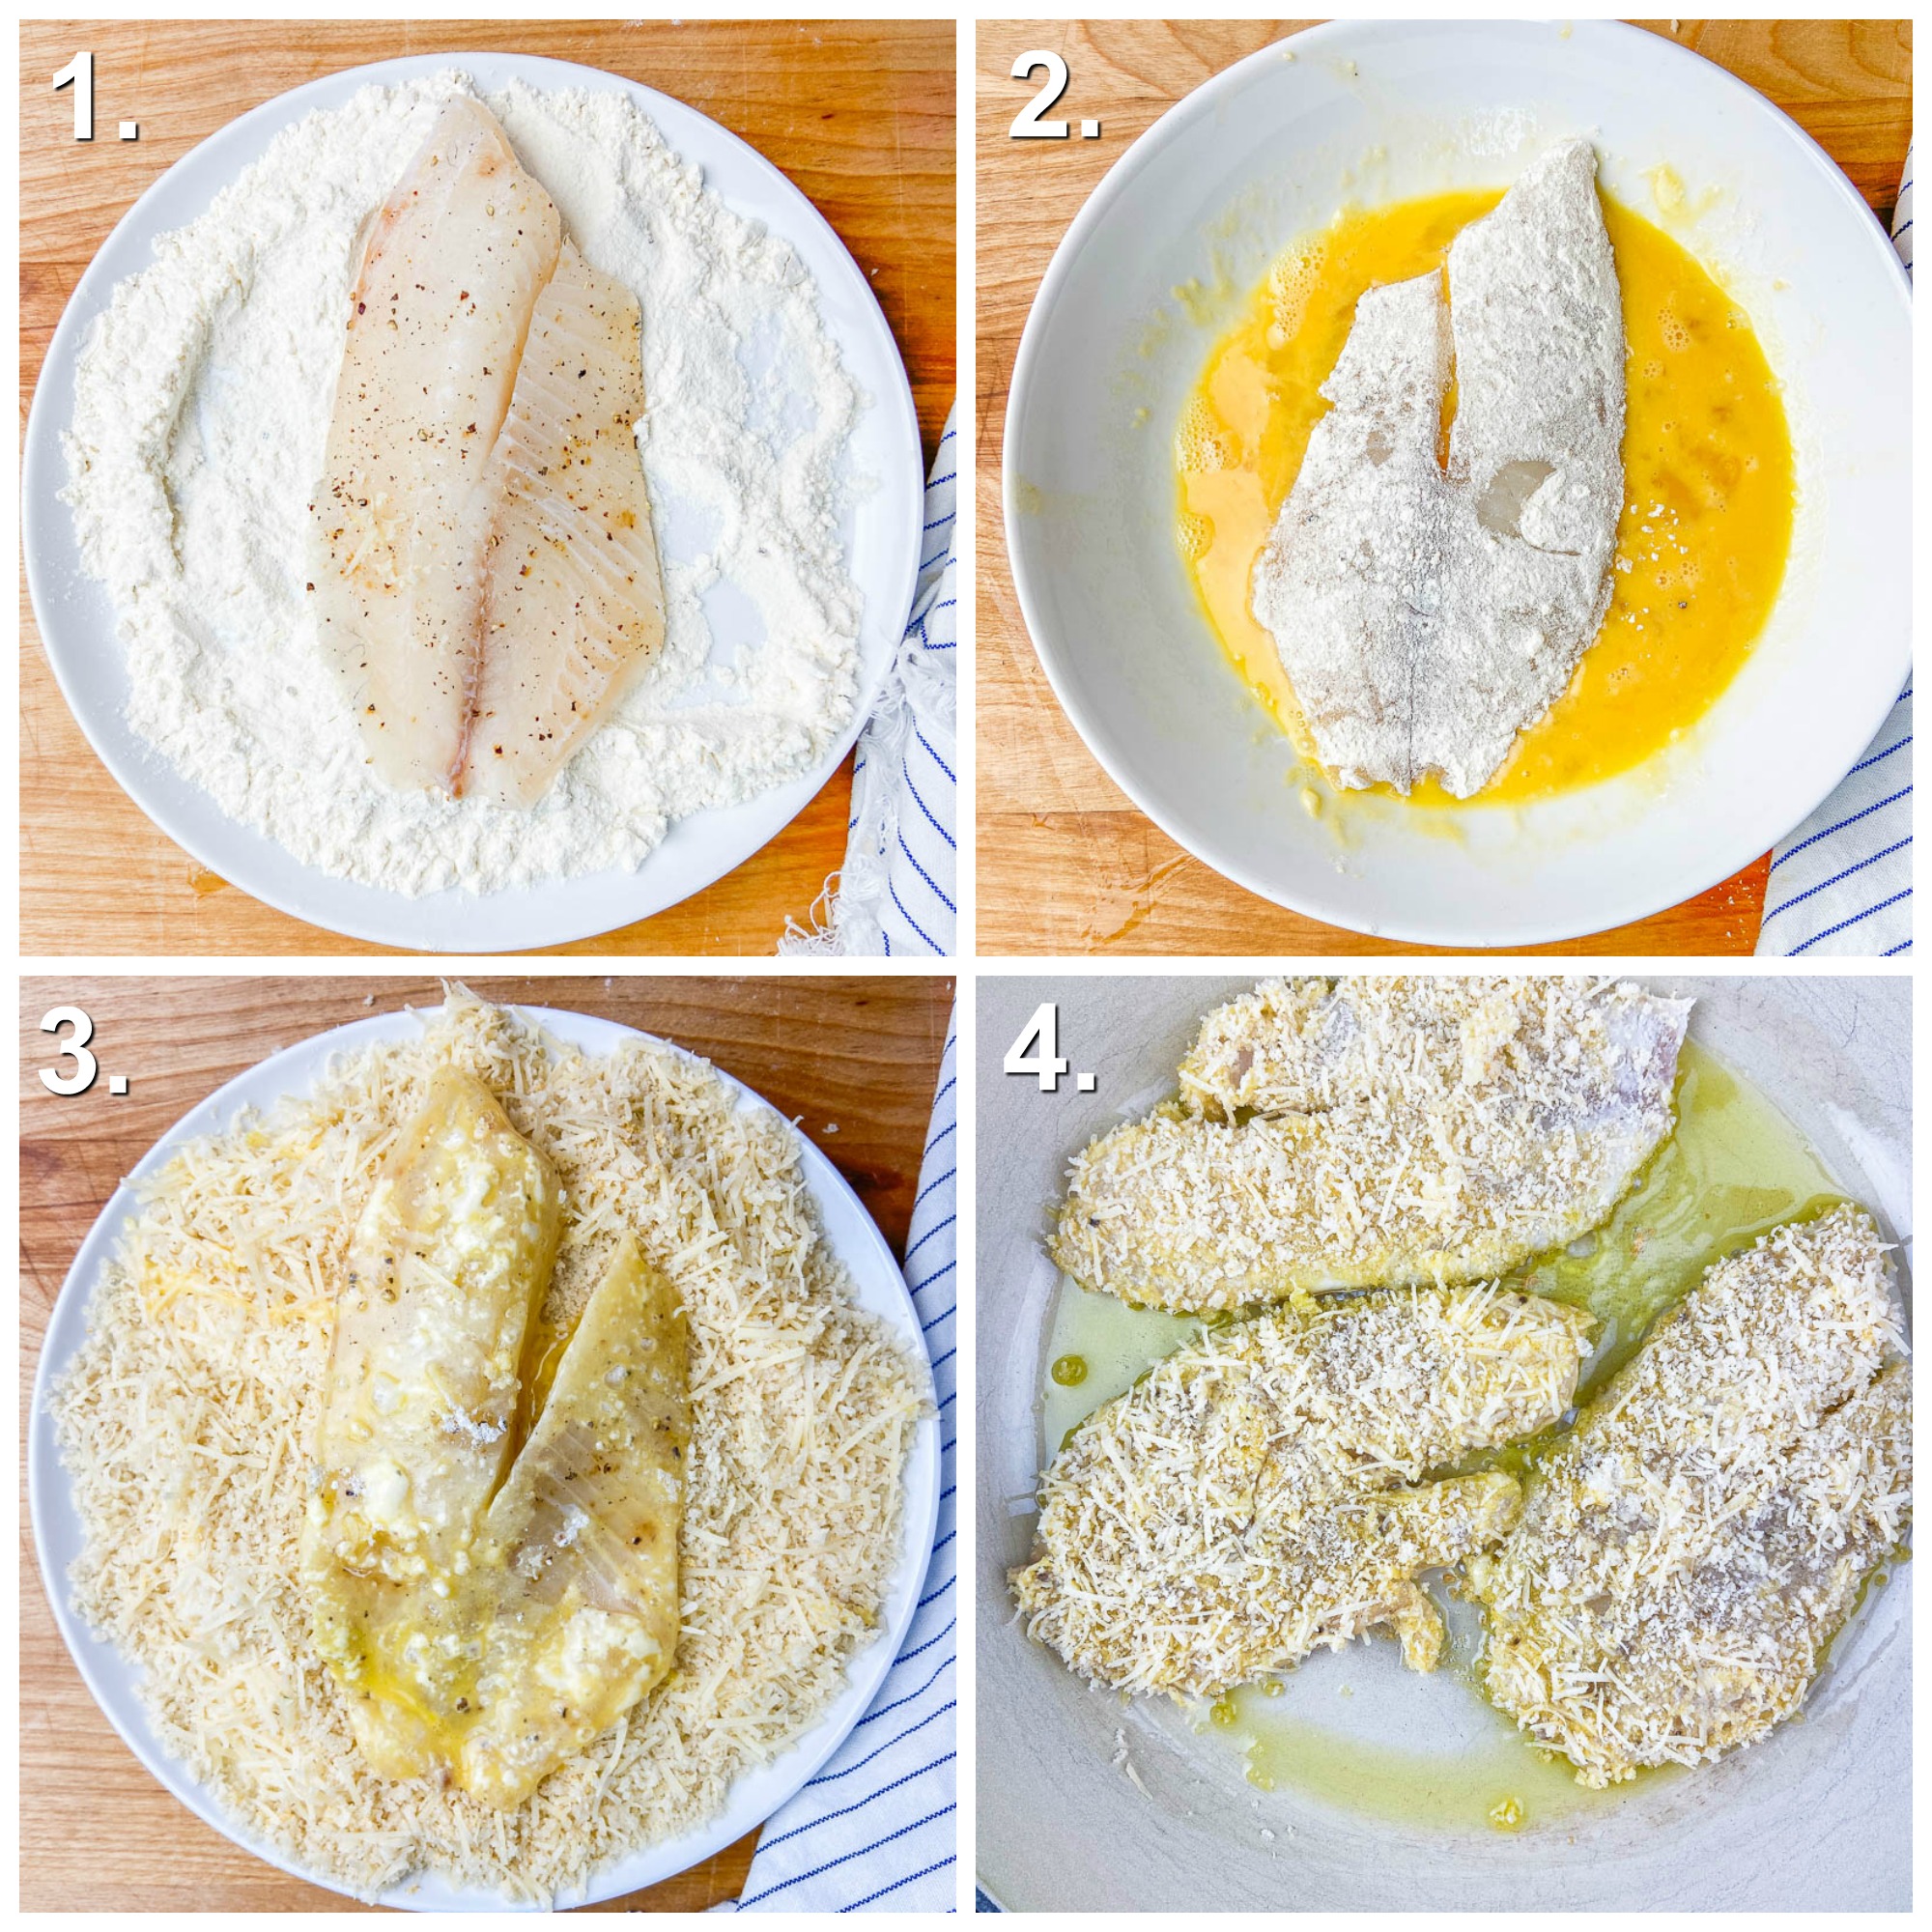 Step by Step Photos for cooking. Photo one: Tilapia filet with flour on white plate. Photo 2: Flour coated tilapia in egg wash on white plate. Photo 3: Tilapia on white plate with bread crumbs and parmesan. Photo 4: Crusted tilapia in a white frying pan. 